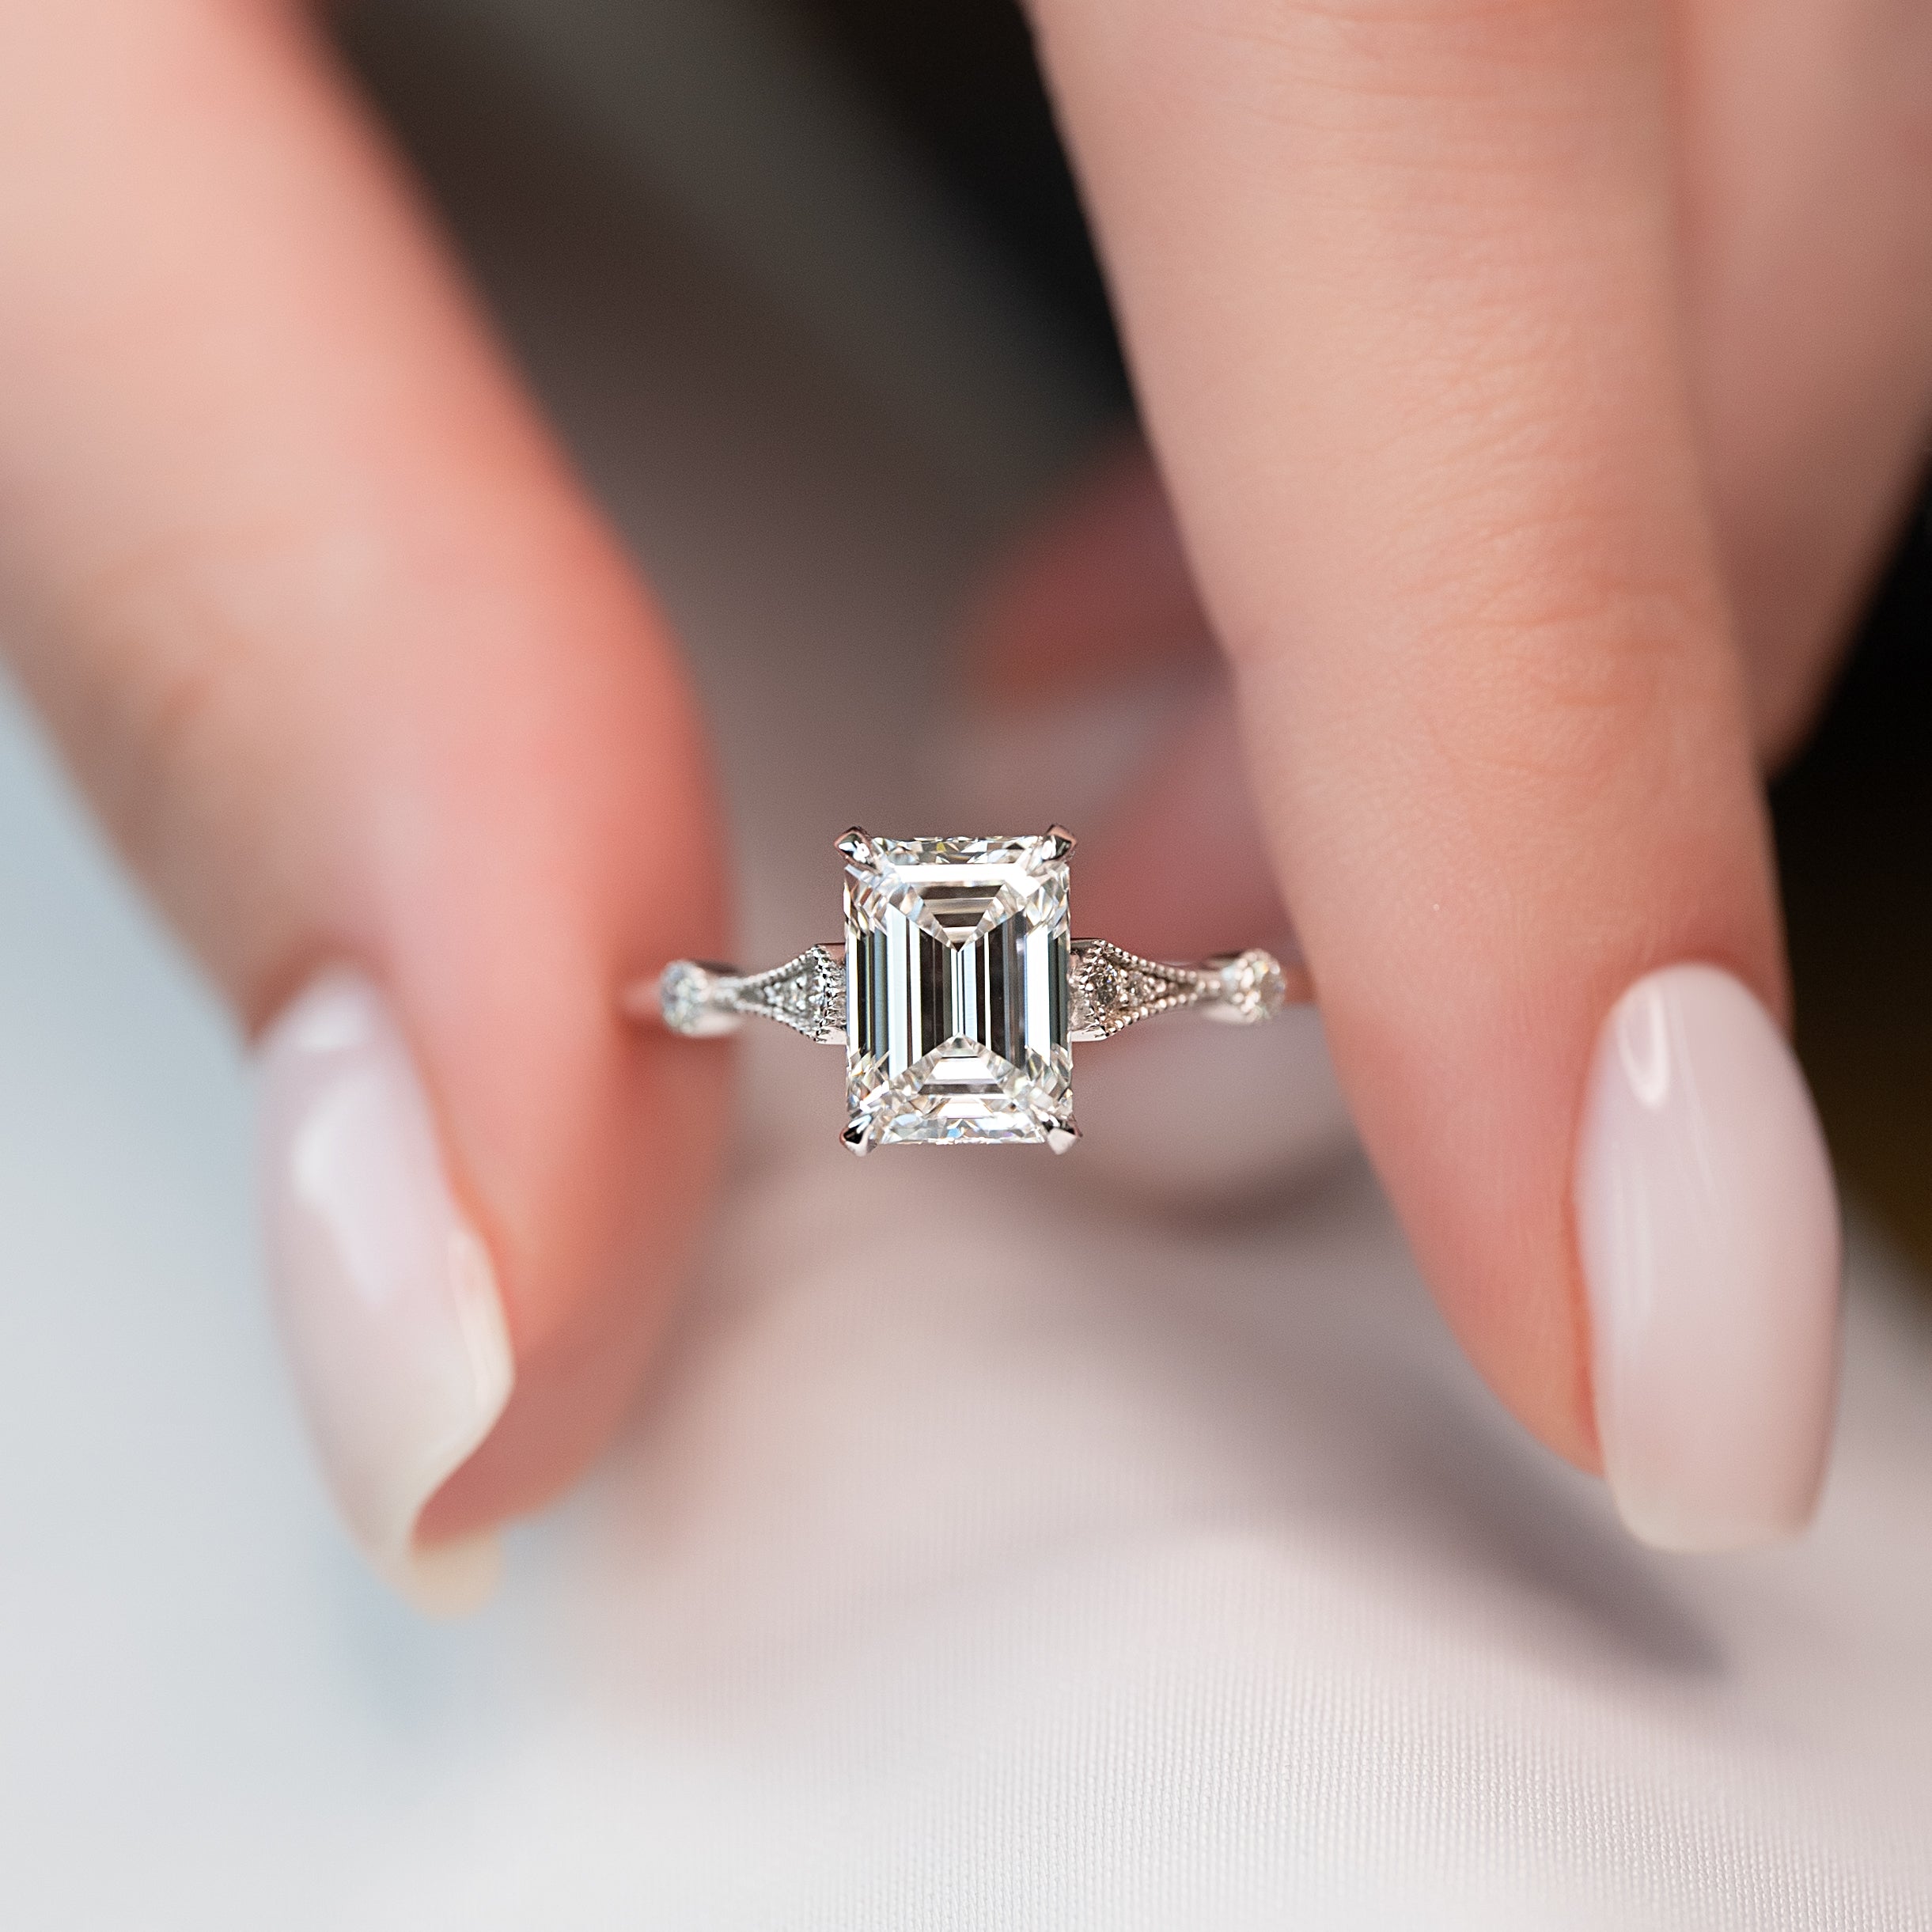 Art Deco Engagement Rings- Why You NEED One!